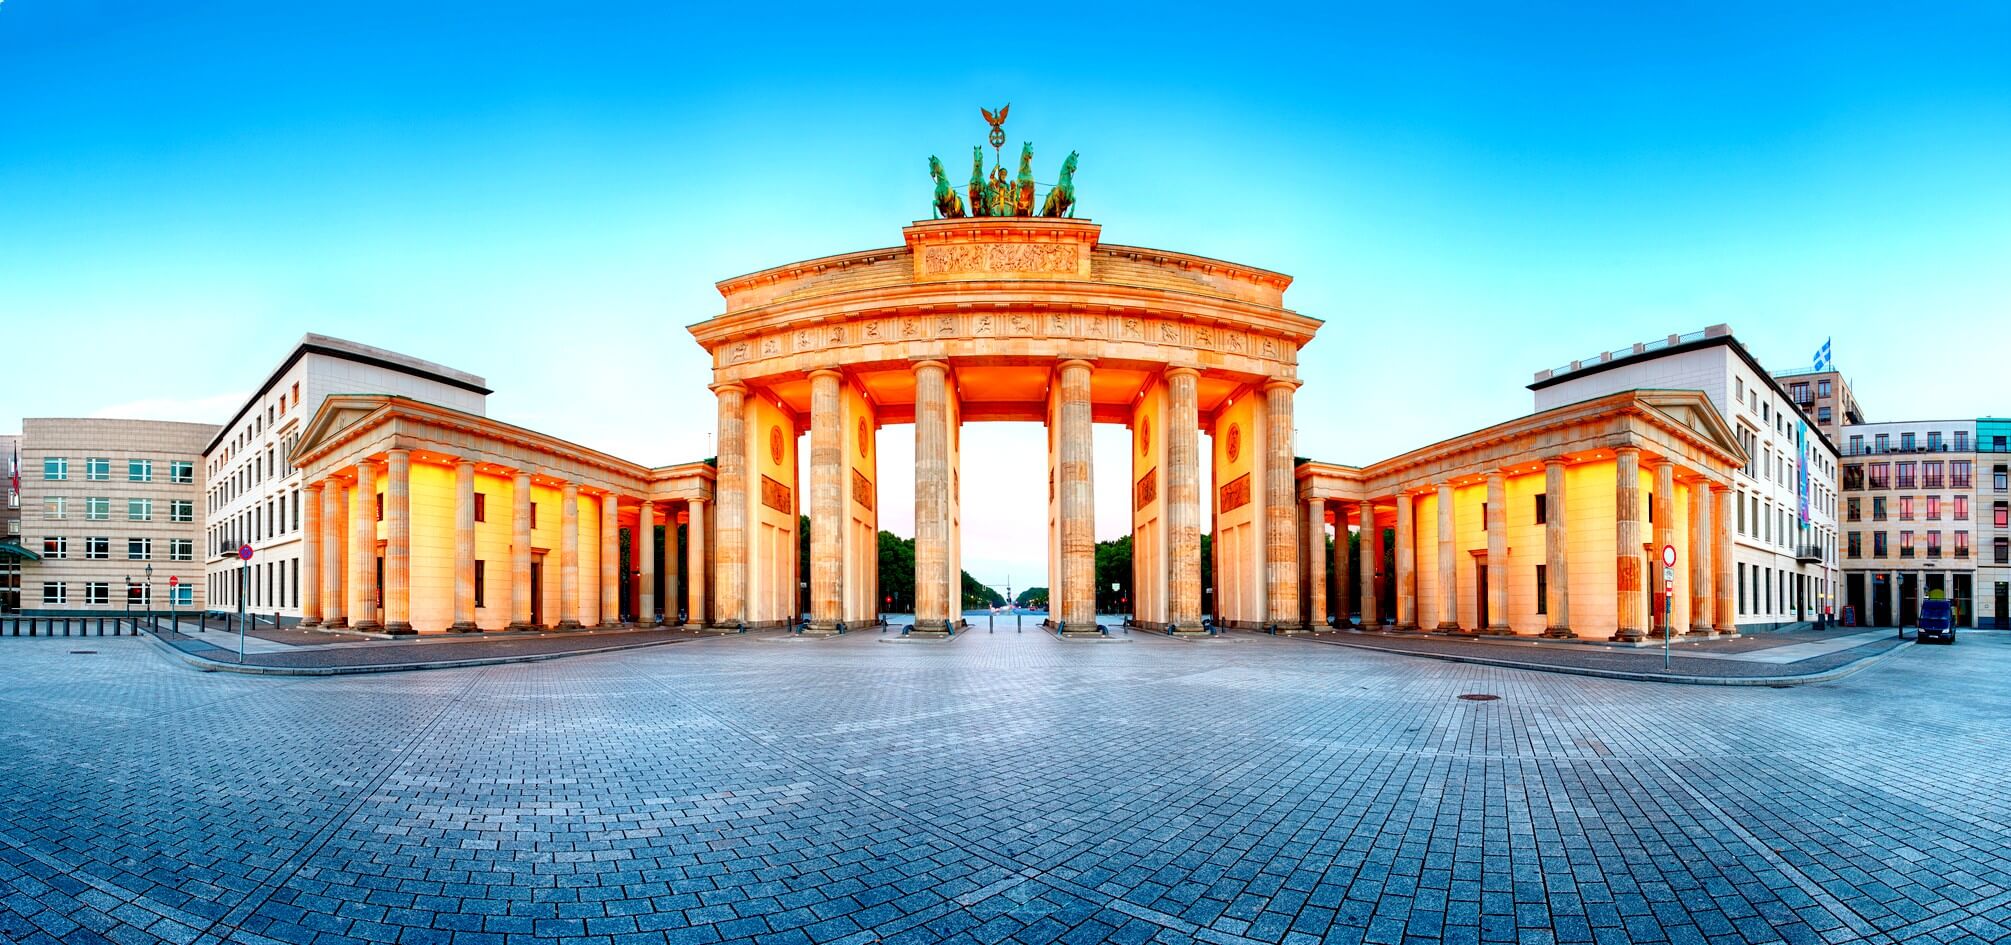 Autumn in Germany - Visit Berlin - AssistAnt Luxury Travel